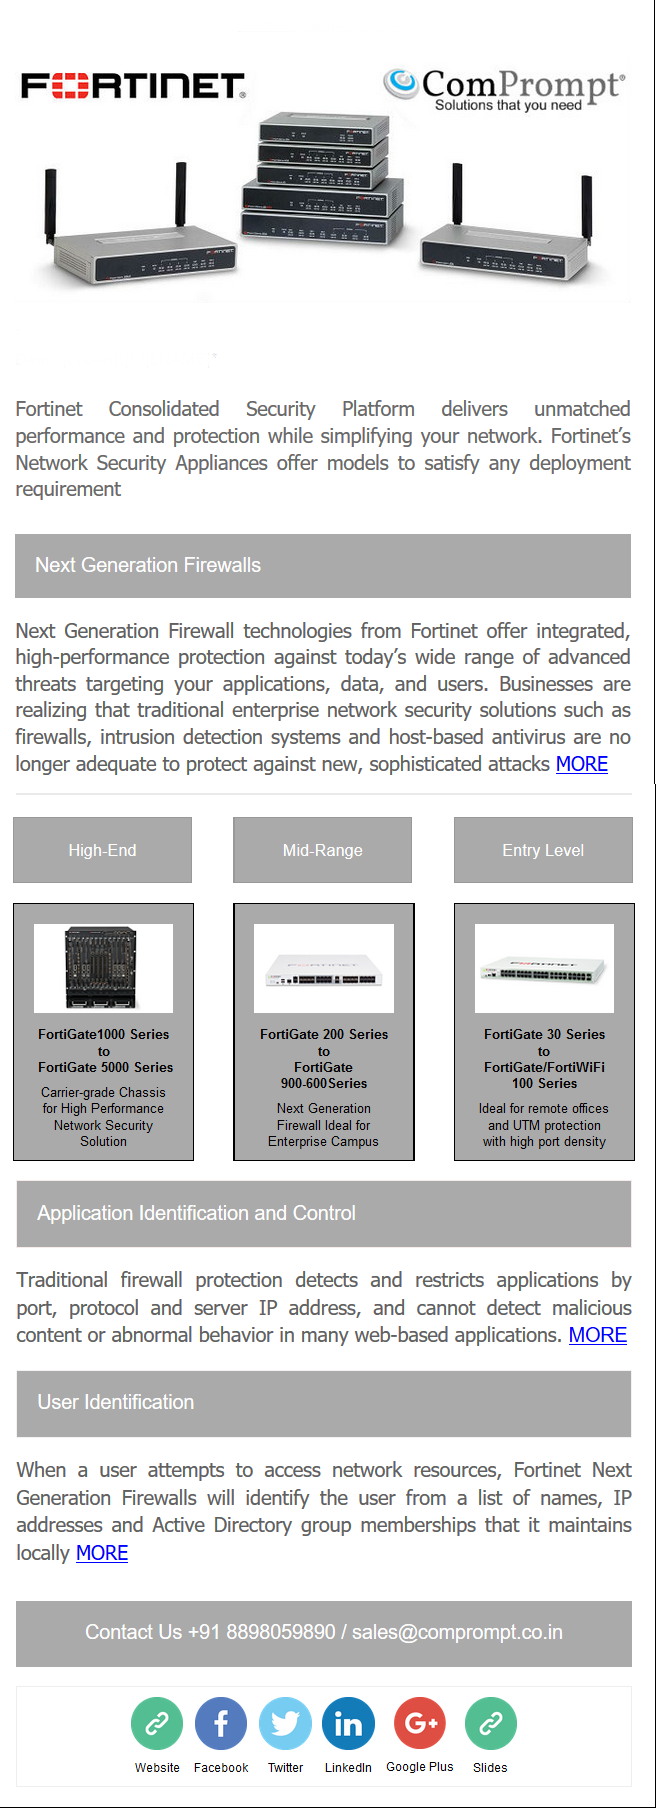 fortinet mailer 